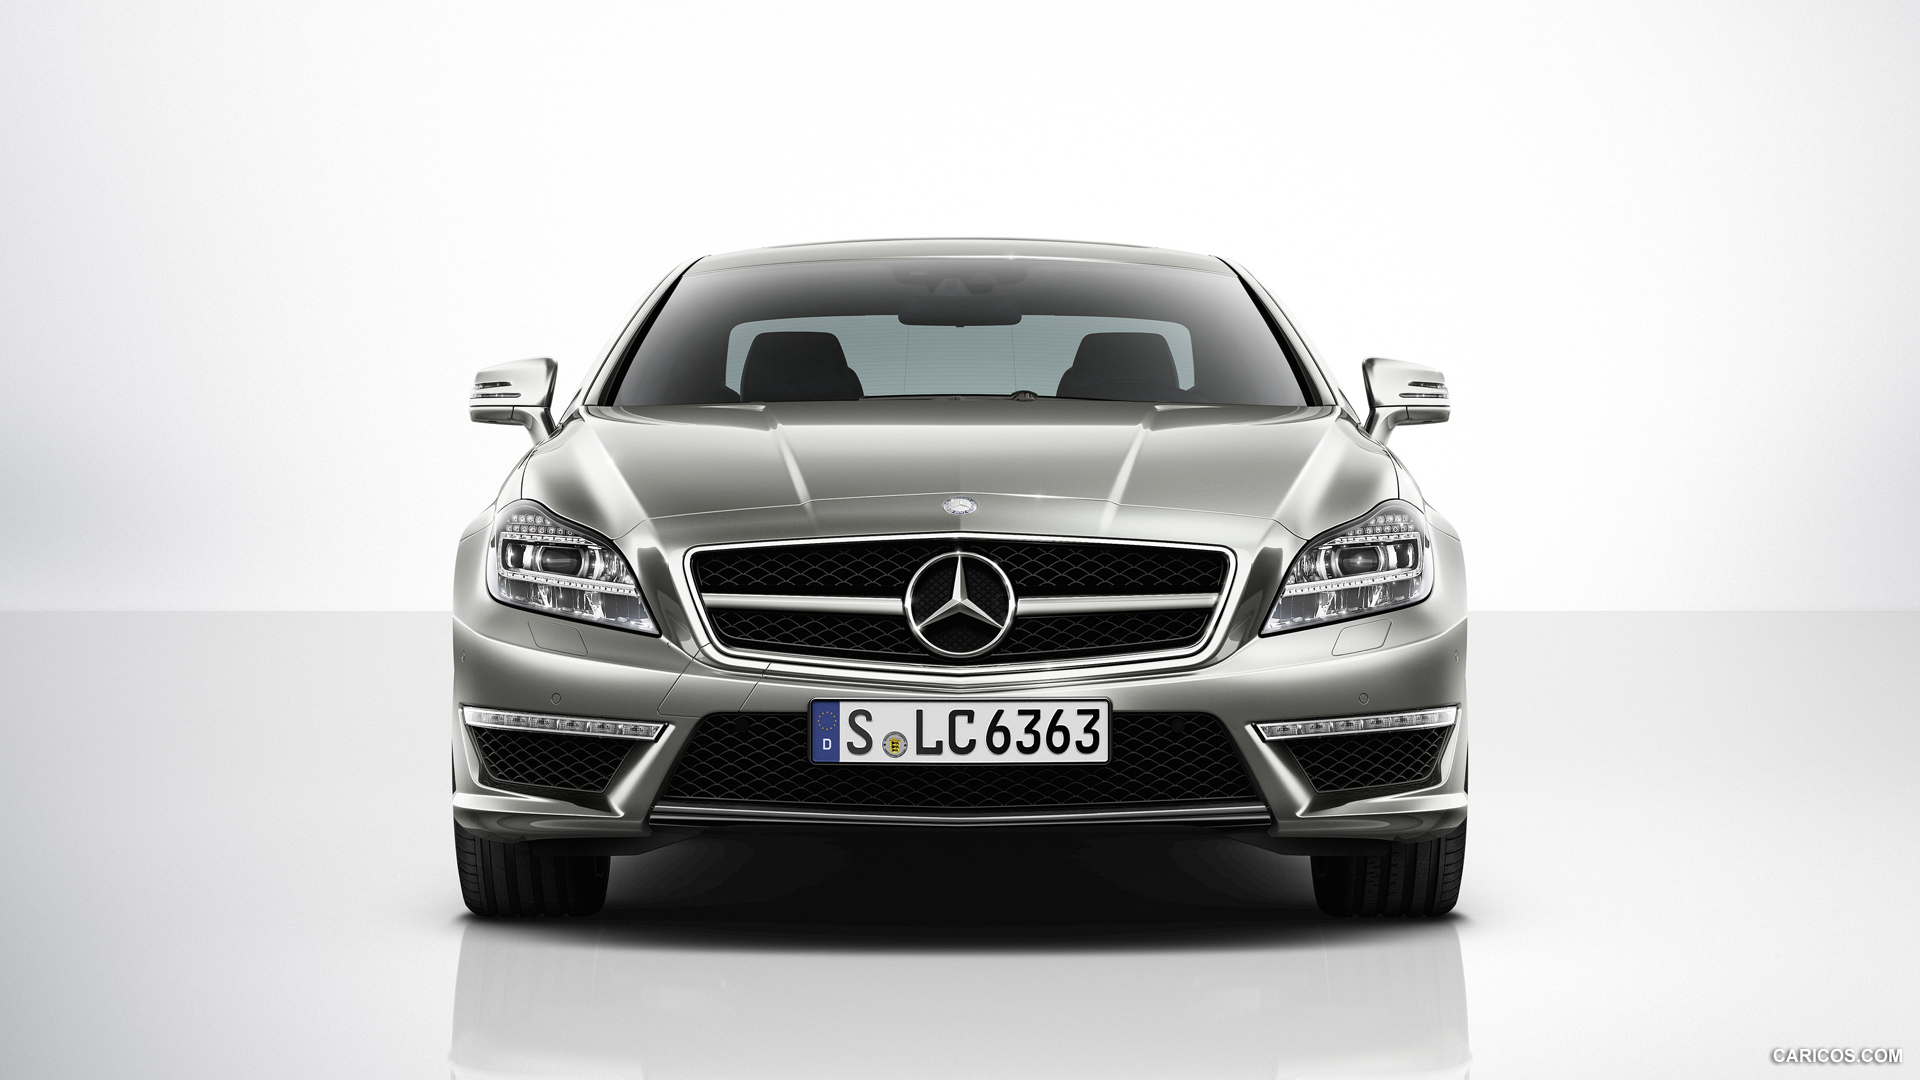 Mercedes-Benz CLS 63 AMG (2012)  - Front Angle , #77 of 85